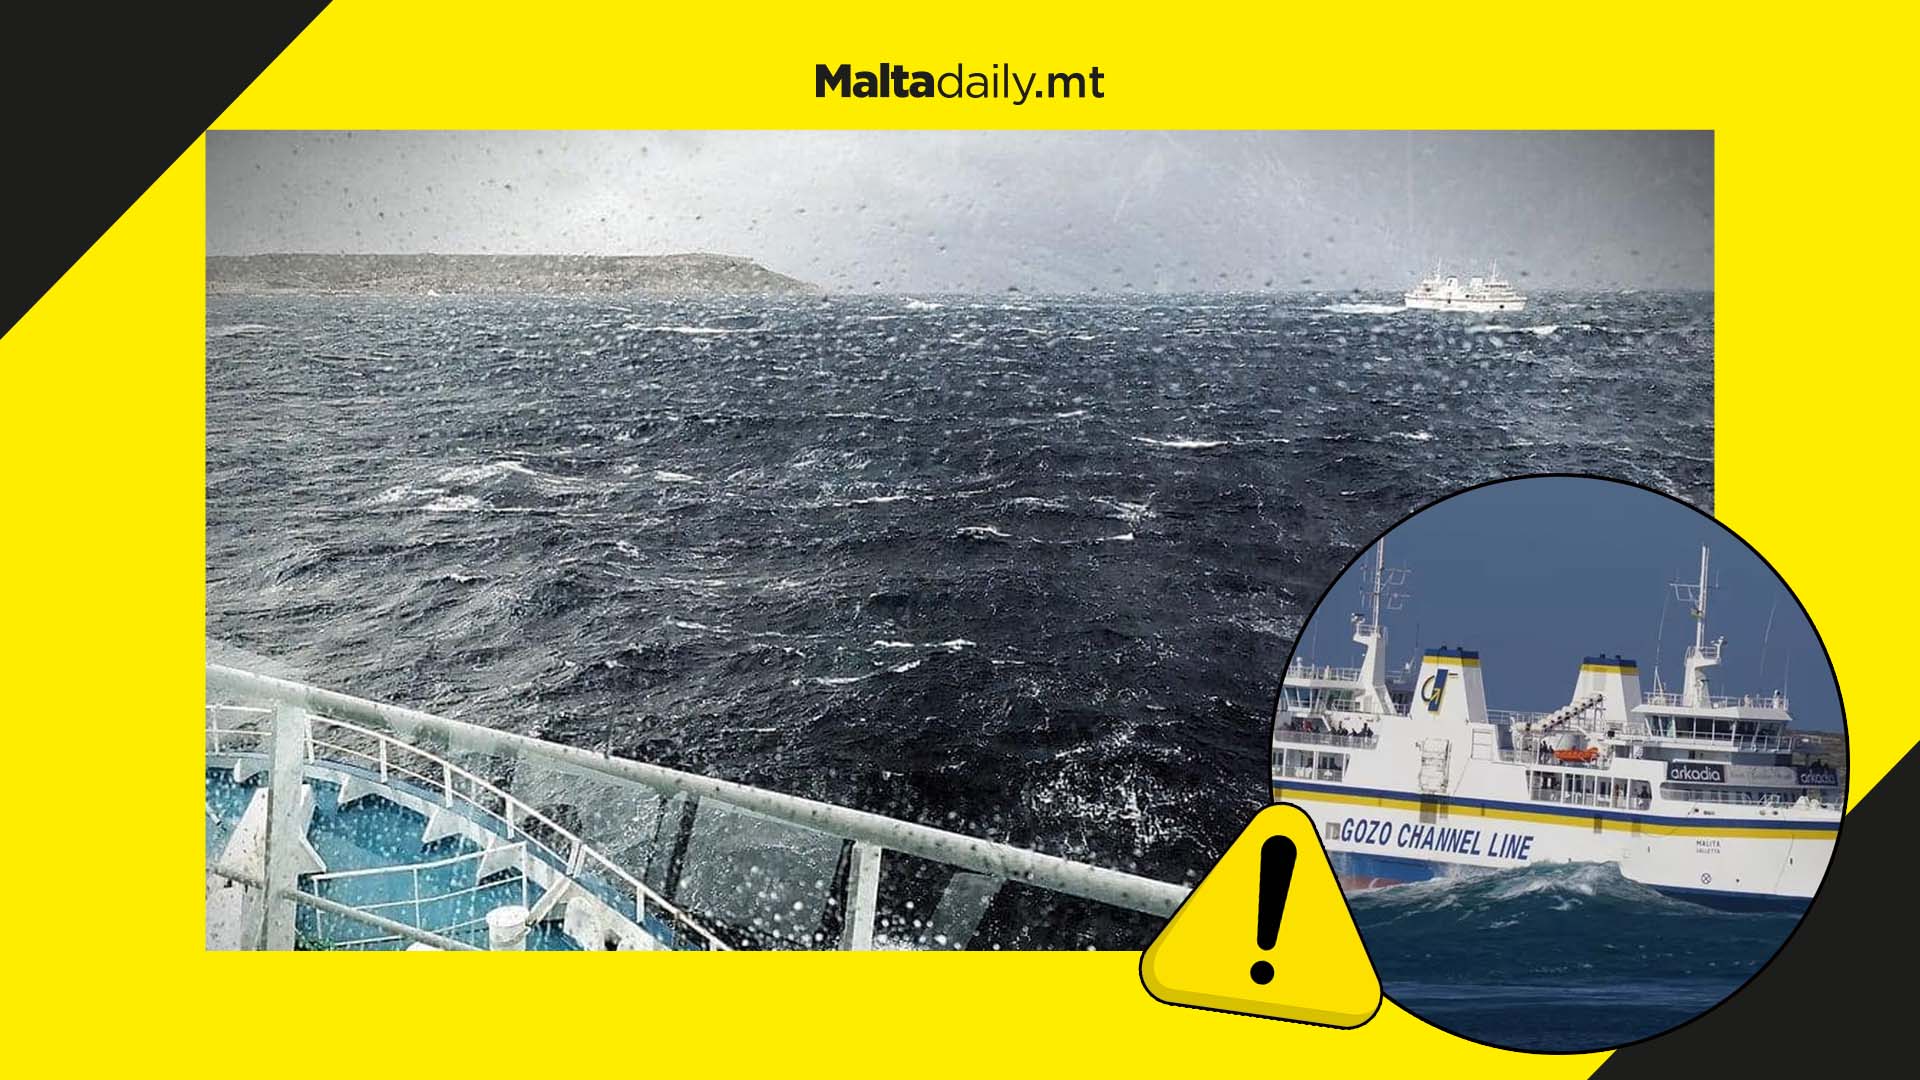 Gozo Channel is back in action following severe weather